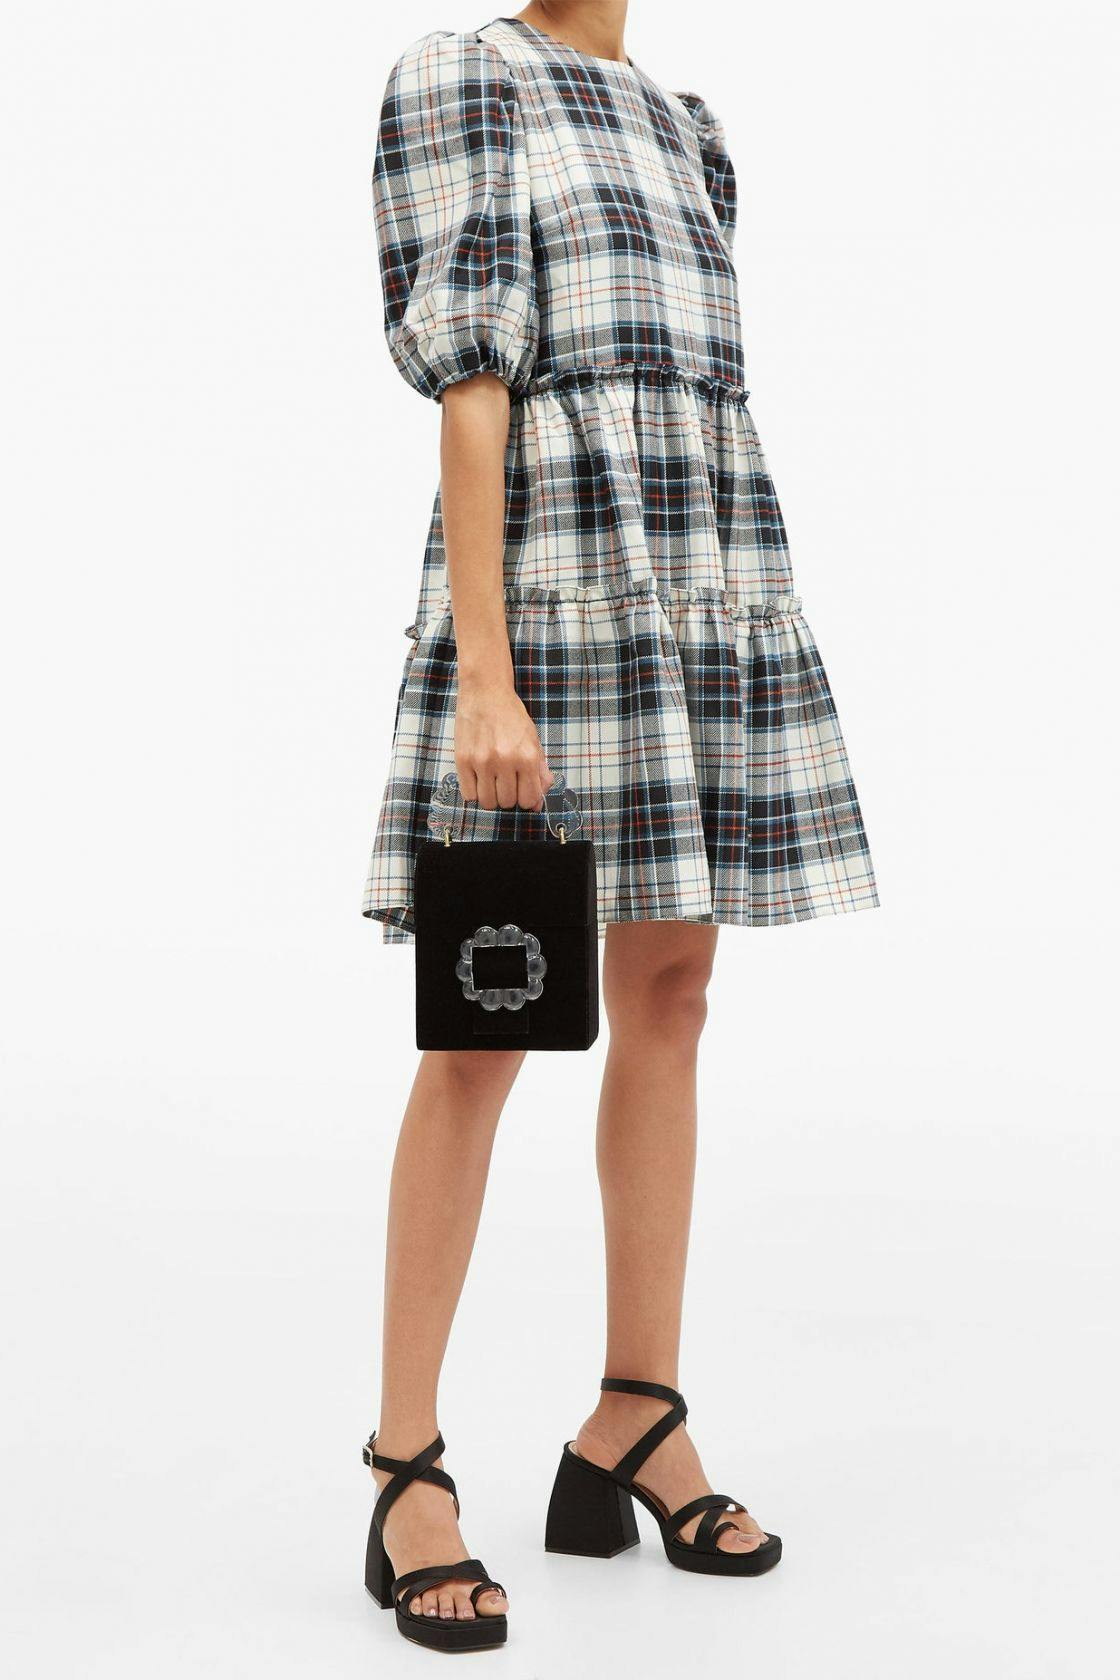 The best checked dresses to wear this season